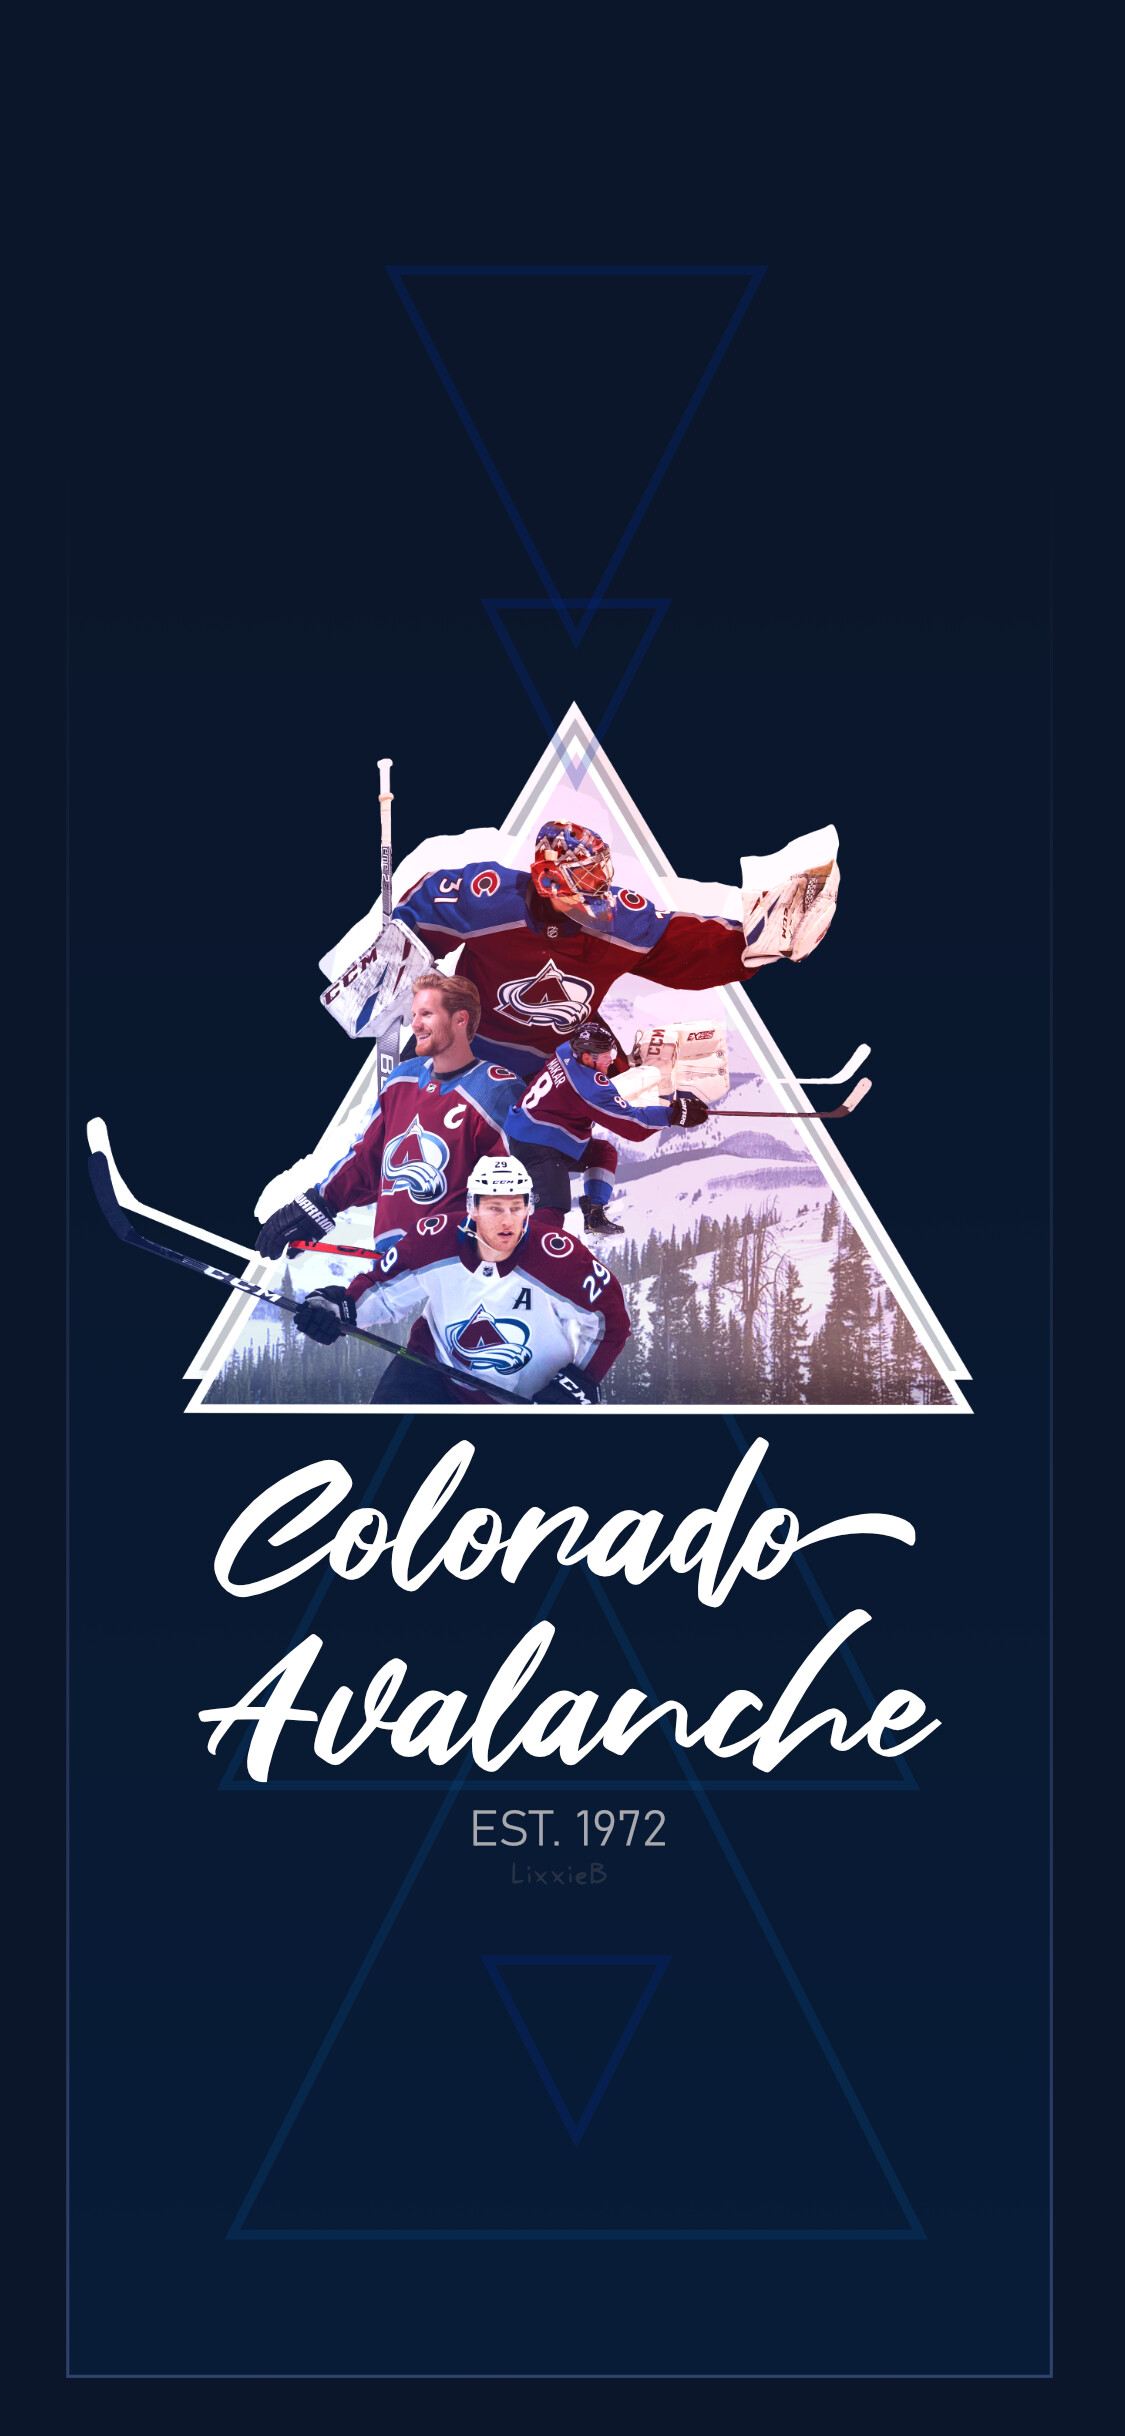 Avalanche Pictures  Download Free Images on Unsplash